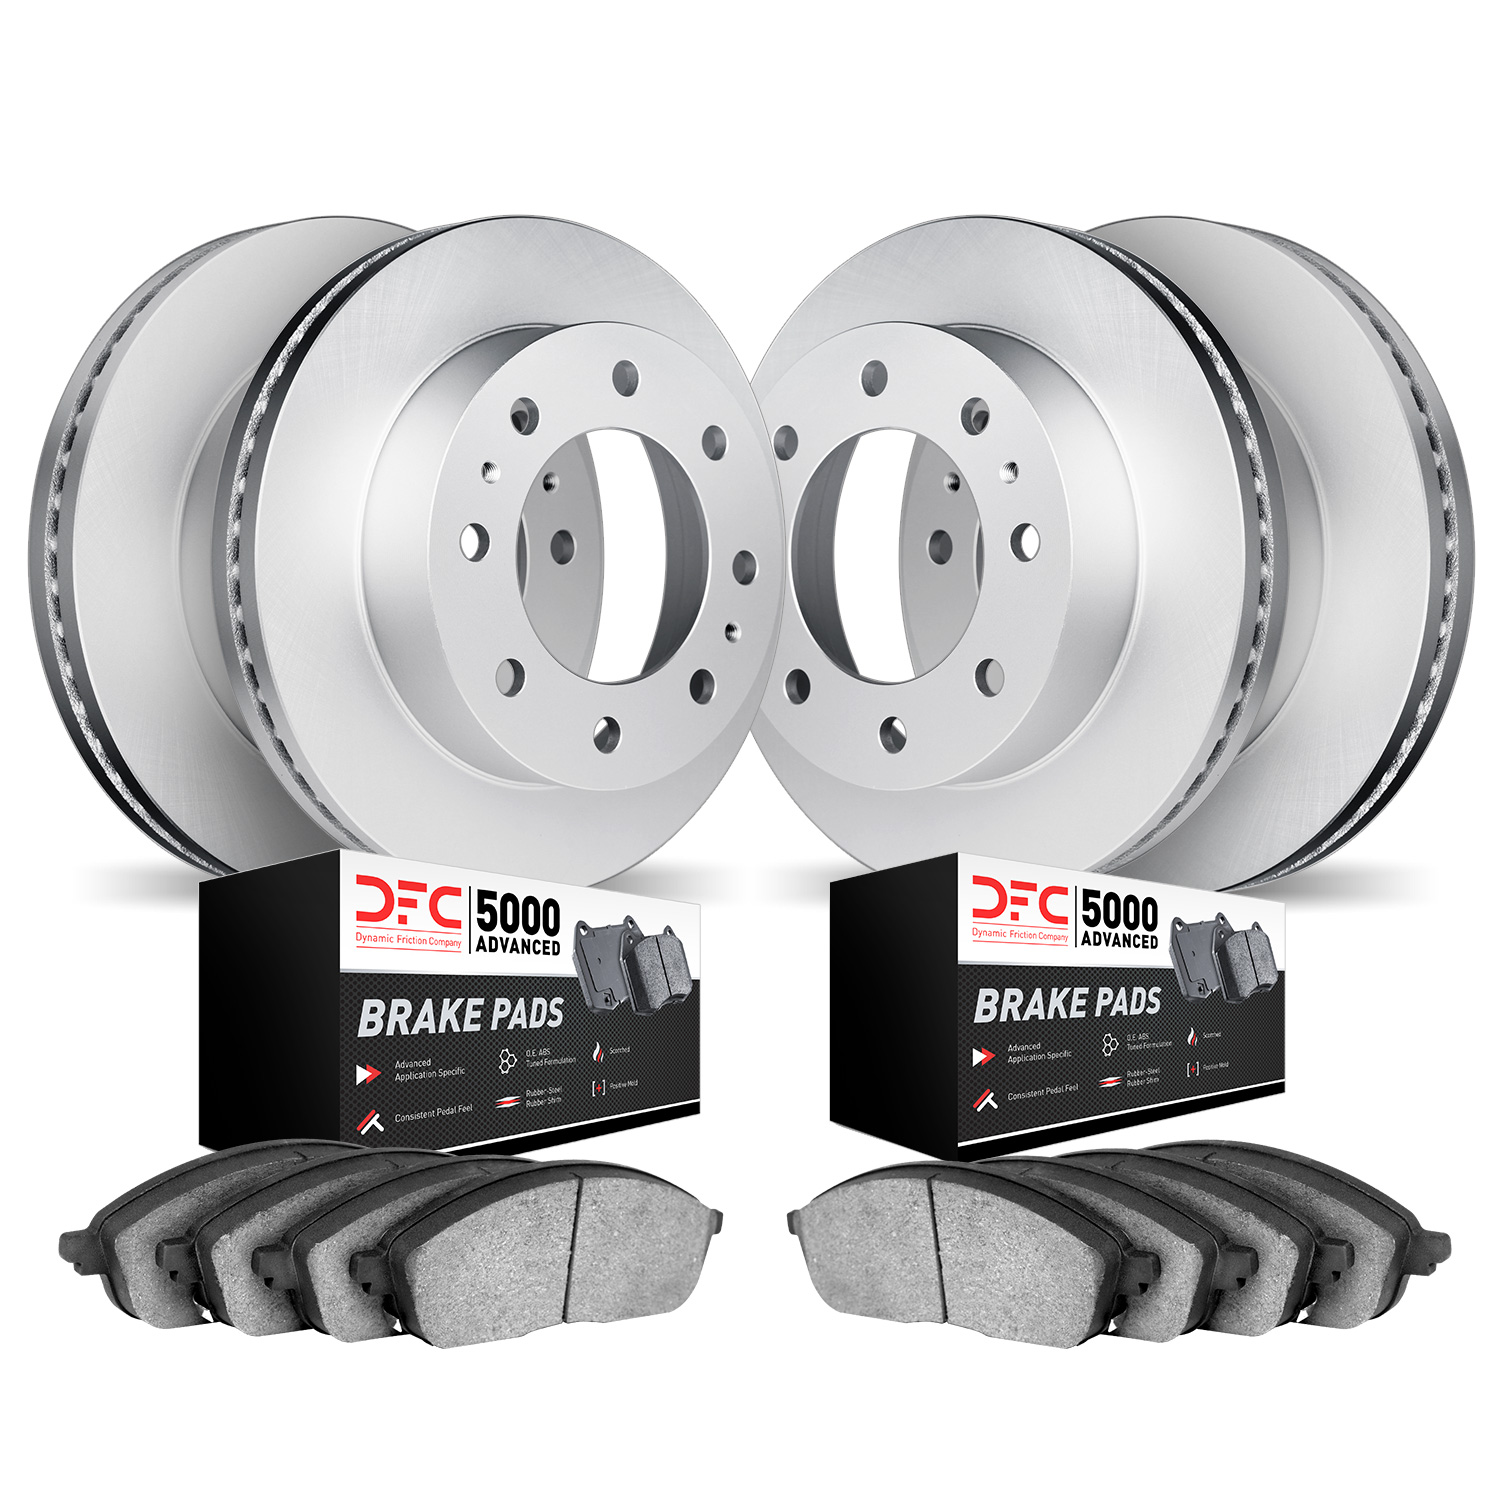 4504-54055 Geospec Brake Rotors w/5000 Advanced Brake Pads Kit, 2010-2012 Ford/Lincoln/Mercury/Mazda, Position: Front and Rear